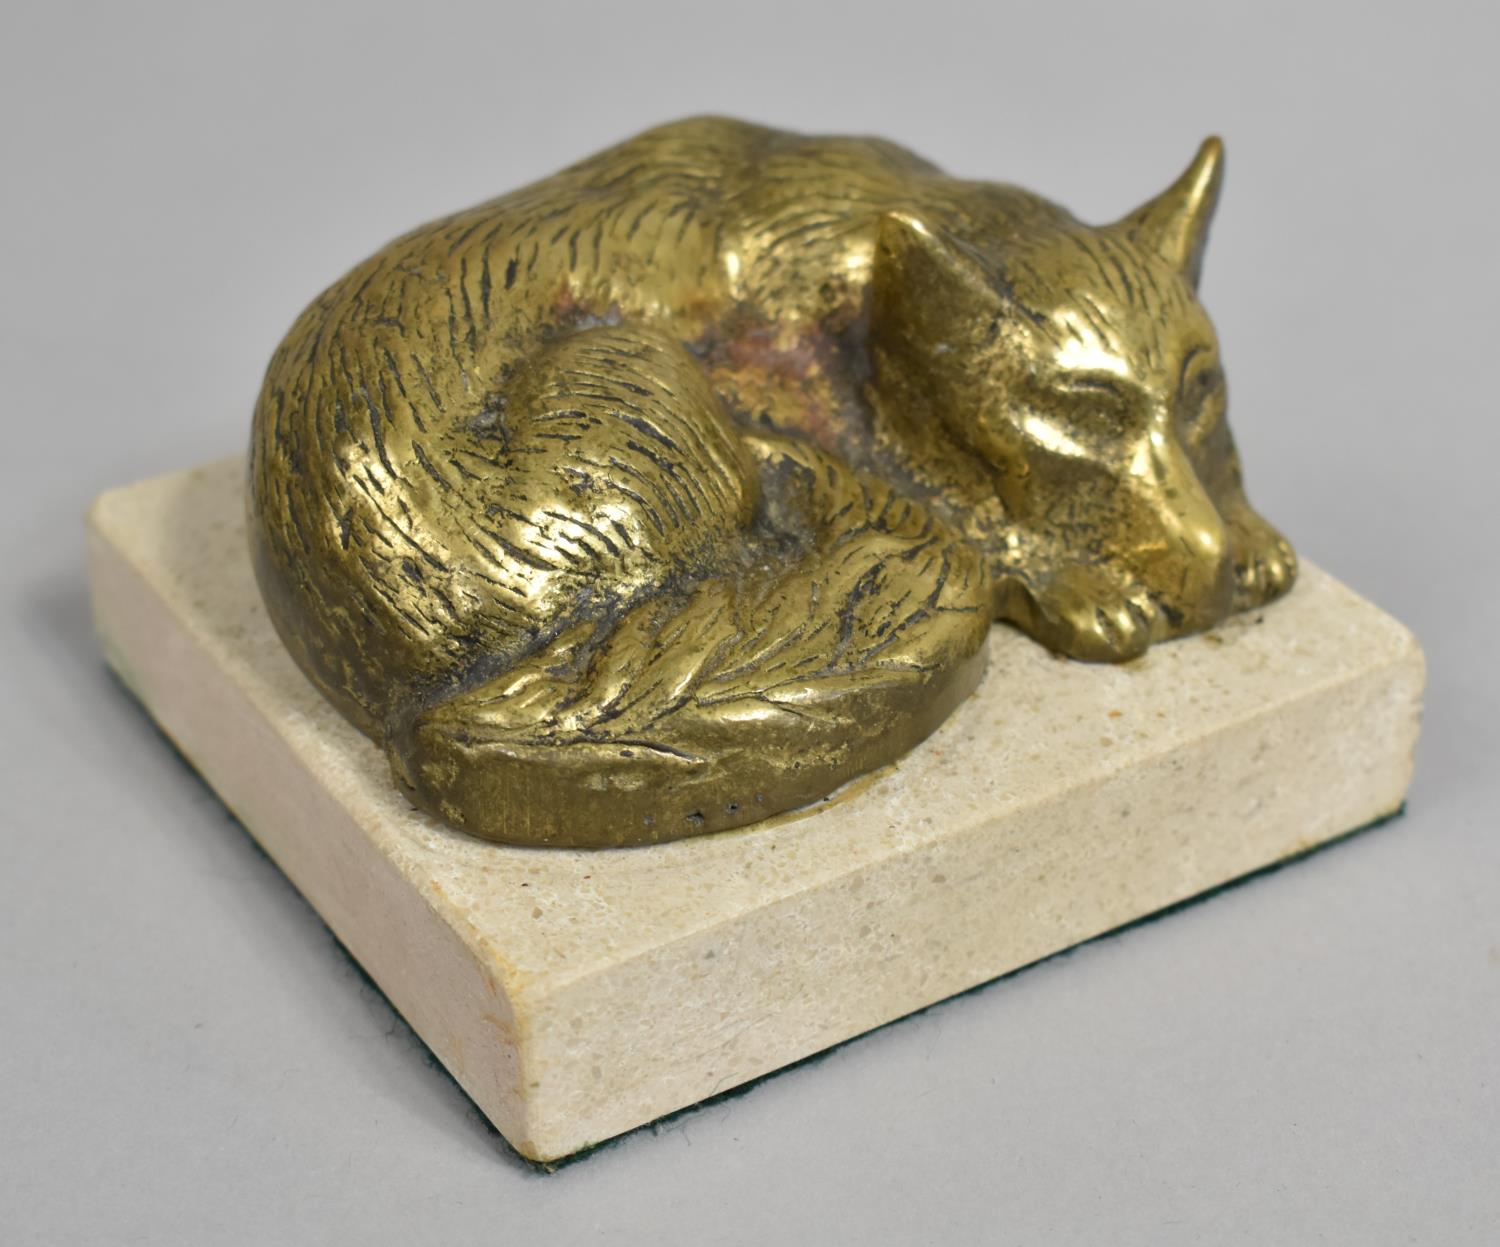 A Cast Brass Model of a Curled Sleeping Fox on Stone Plinth, 10cms Square